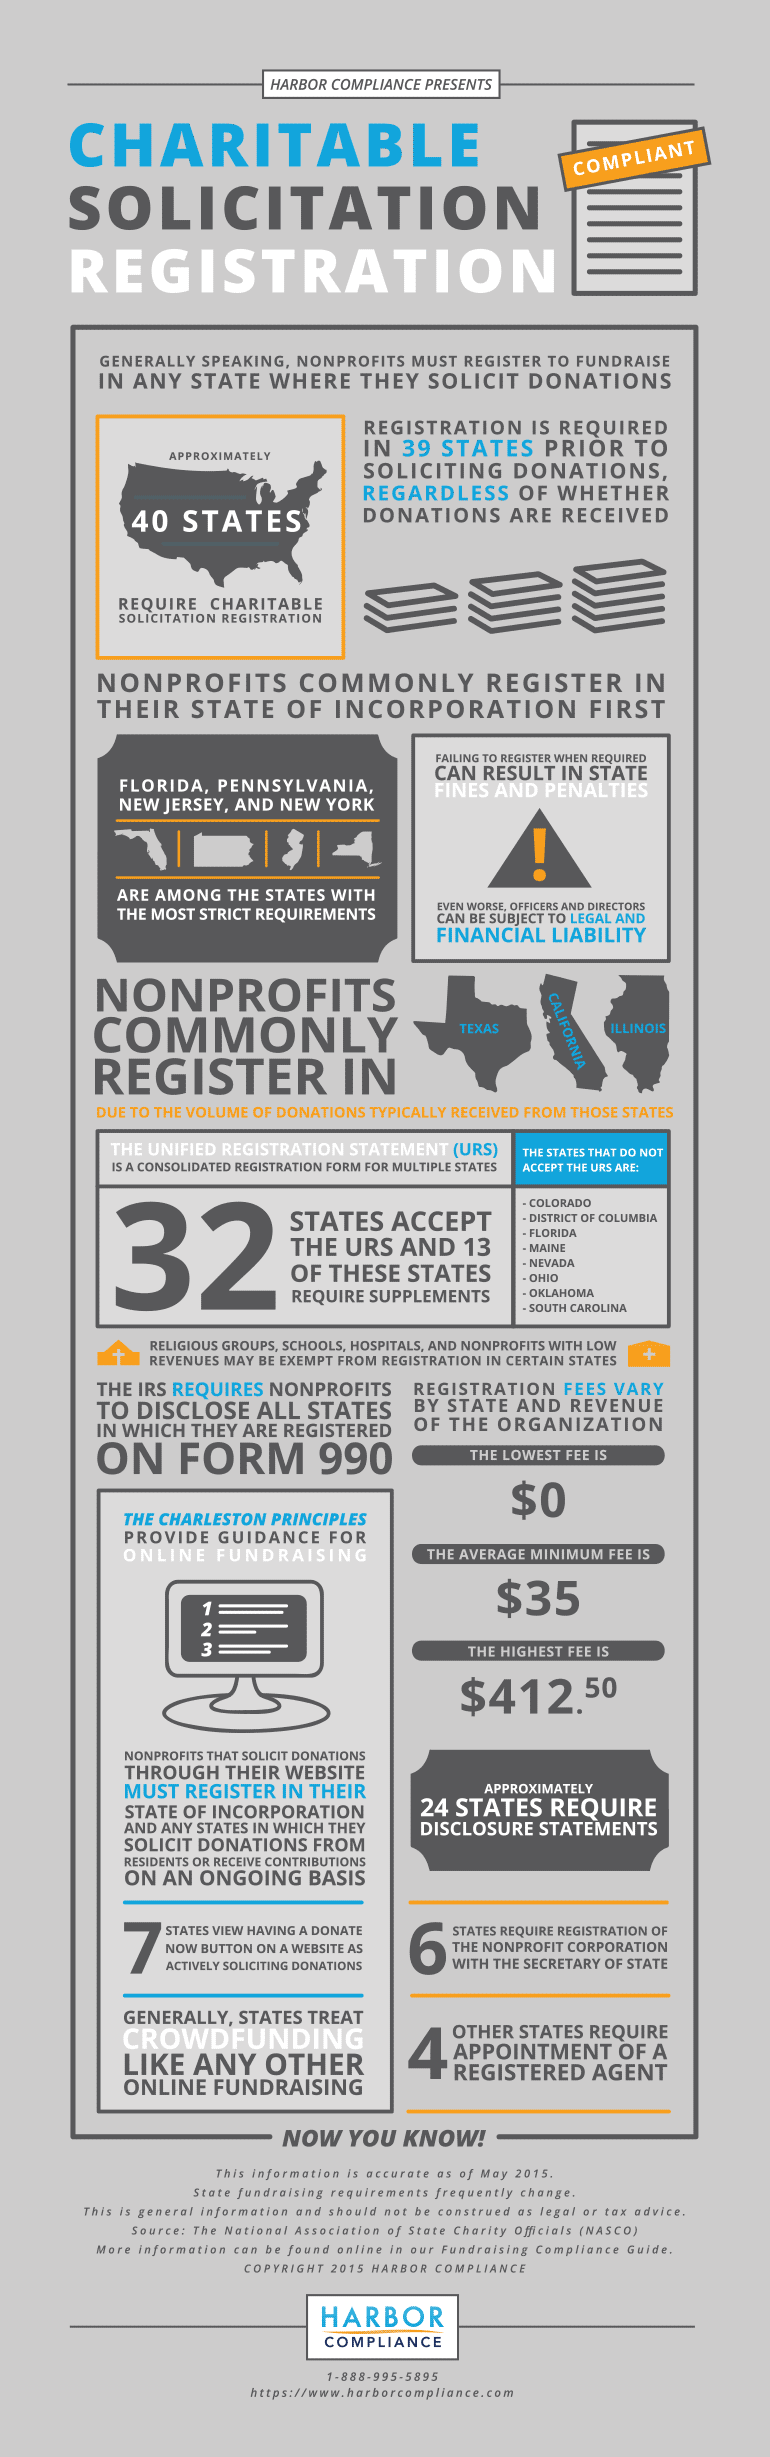 An infographic of Charitable Solicitation Registration